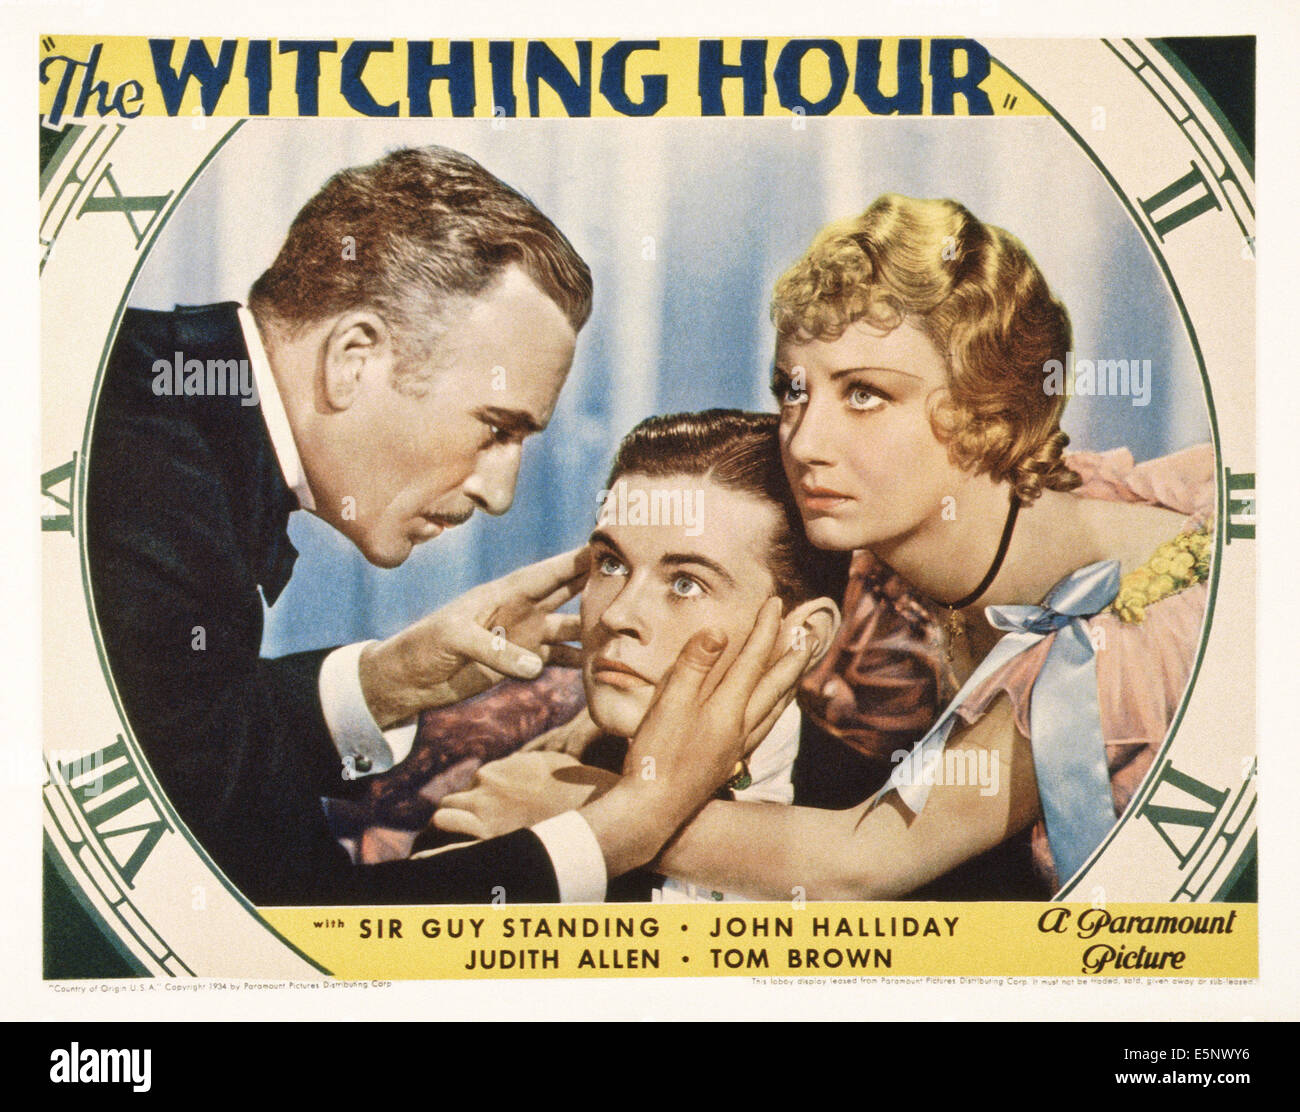 THE WITCHING HOUR, US lobbycard, from left: John Halliday, Tom Brown, Judith Allen, 1934 Stock Photo